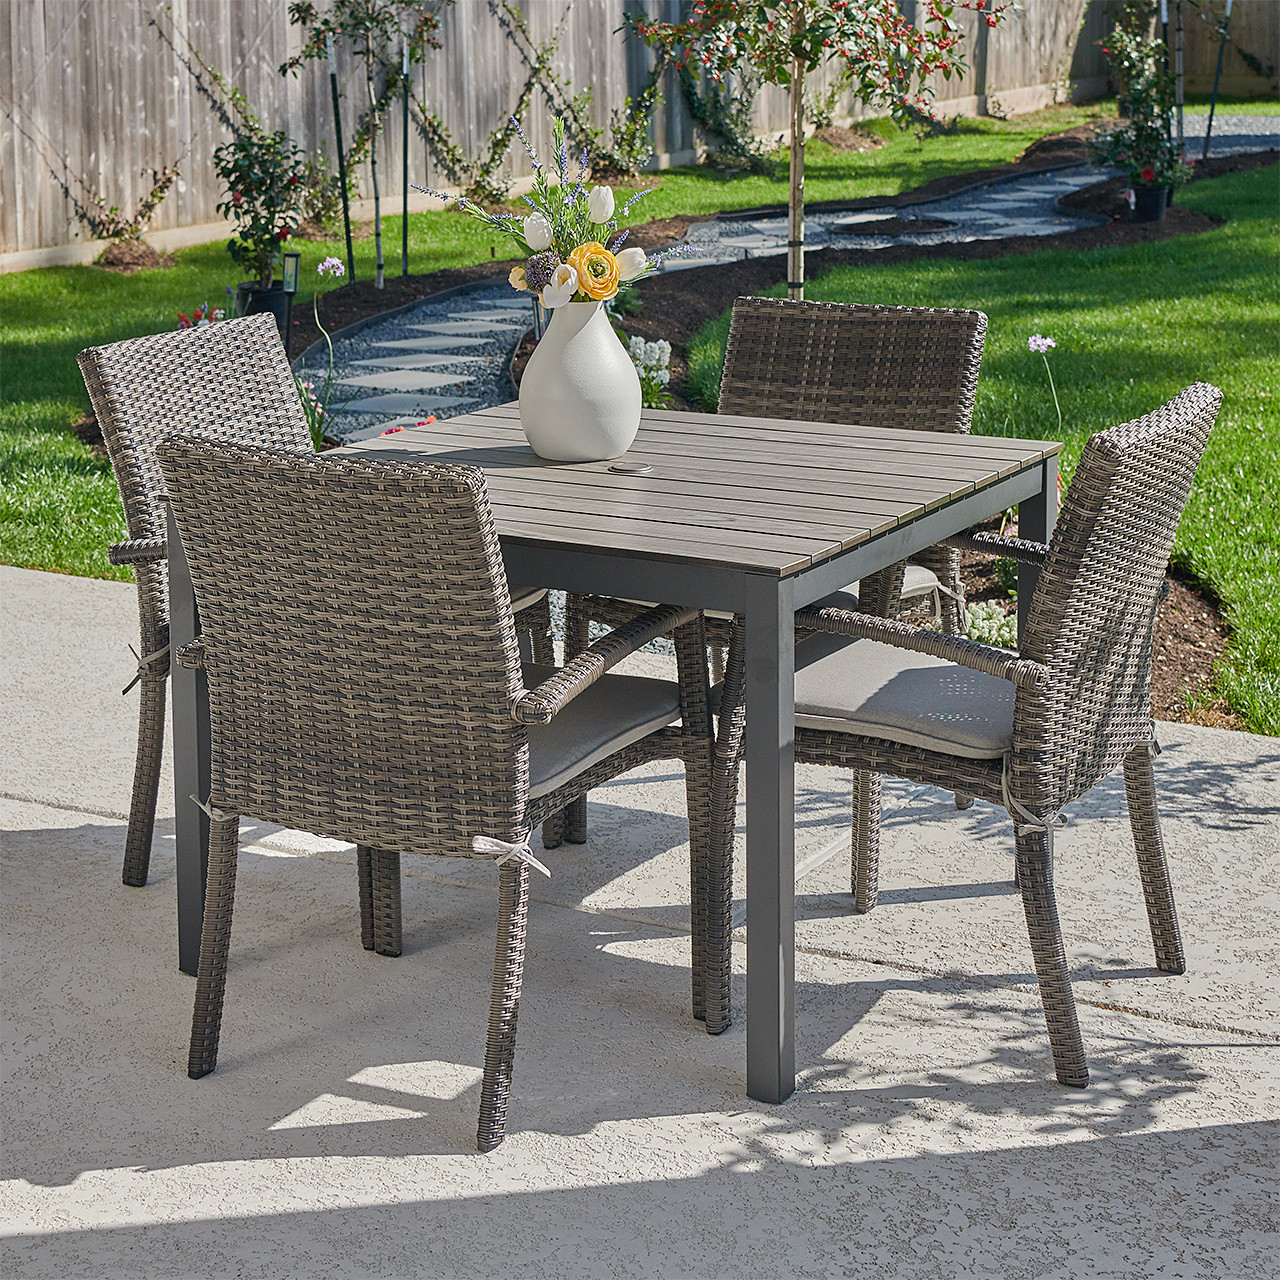 Contempo Husk Outdoor Wicker with Cushions 5 Pc. Dining Set + 41 in. Sq. Table